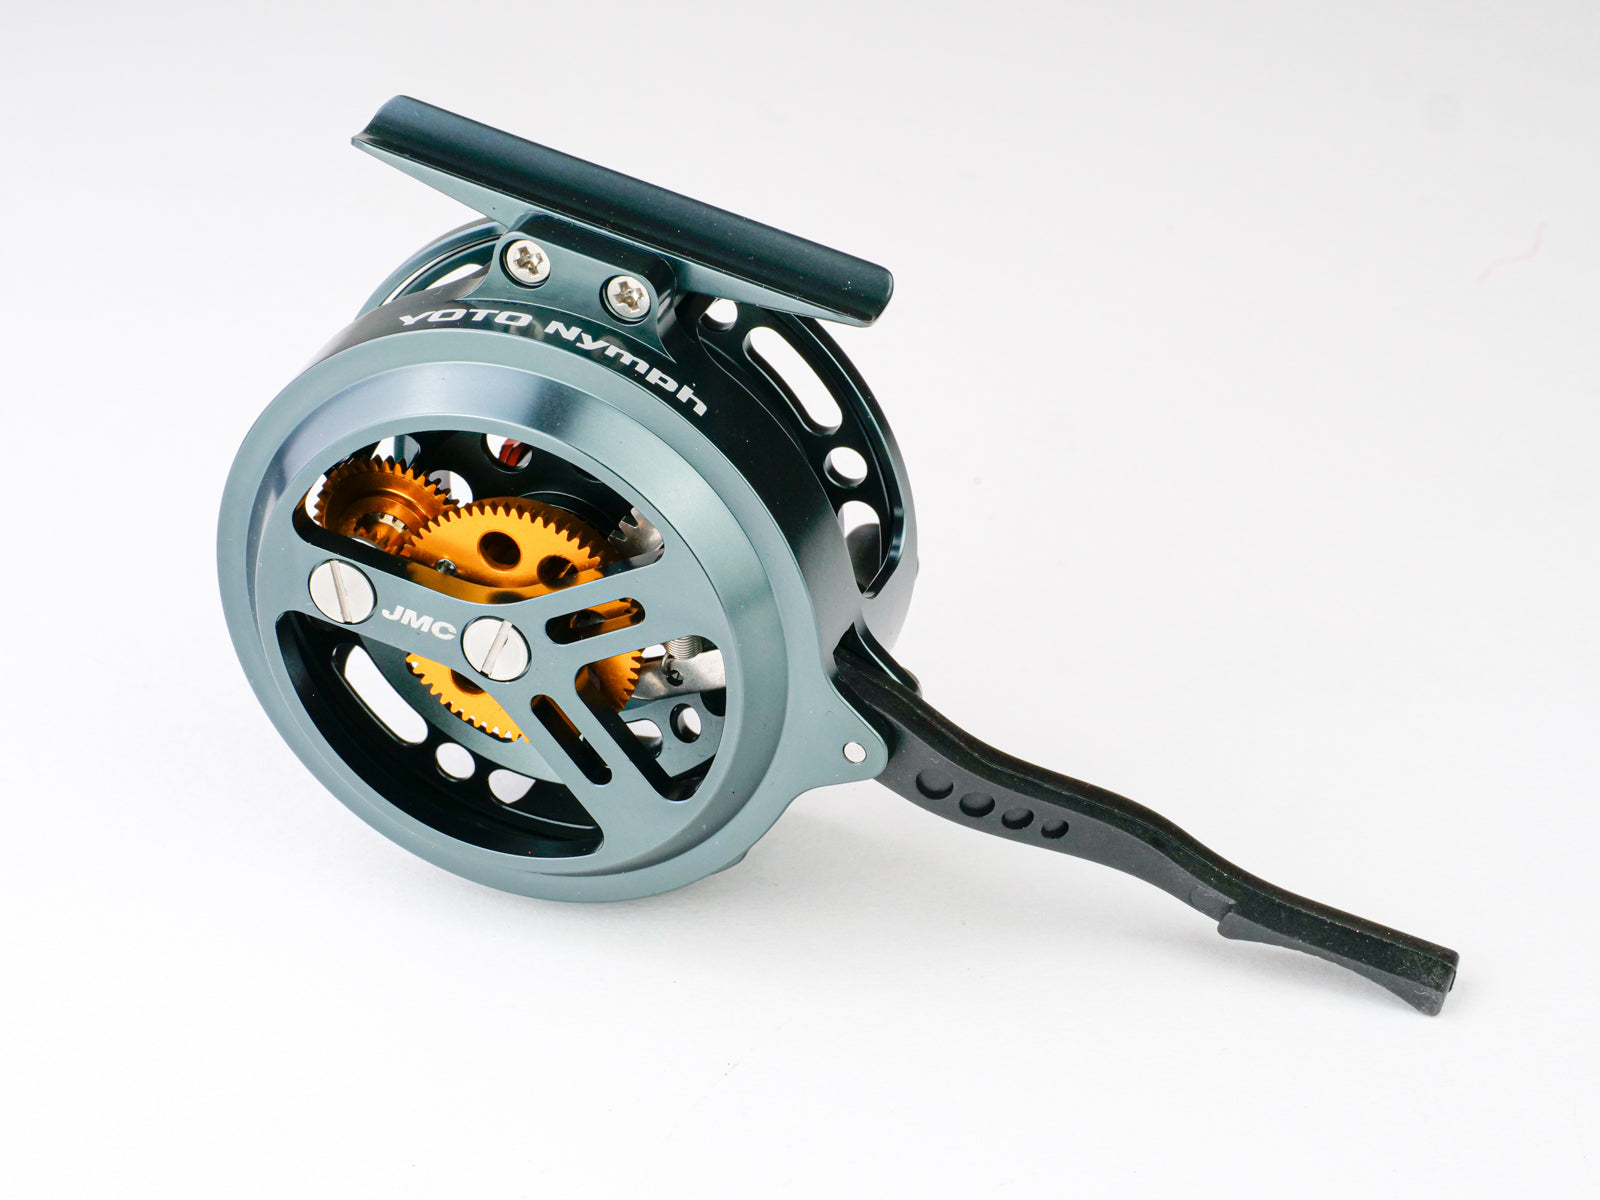  H&H Catch-O-Matic Auto Fishing Reel Yo-Yo with High Visibility  Chartreuse Nylon Line Automatic Fishing Reel for Catfish (12 Pack) : Yo Yos  : Sports & Outdoors